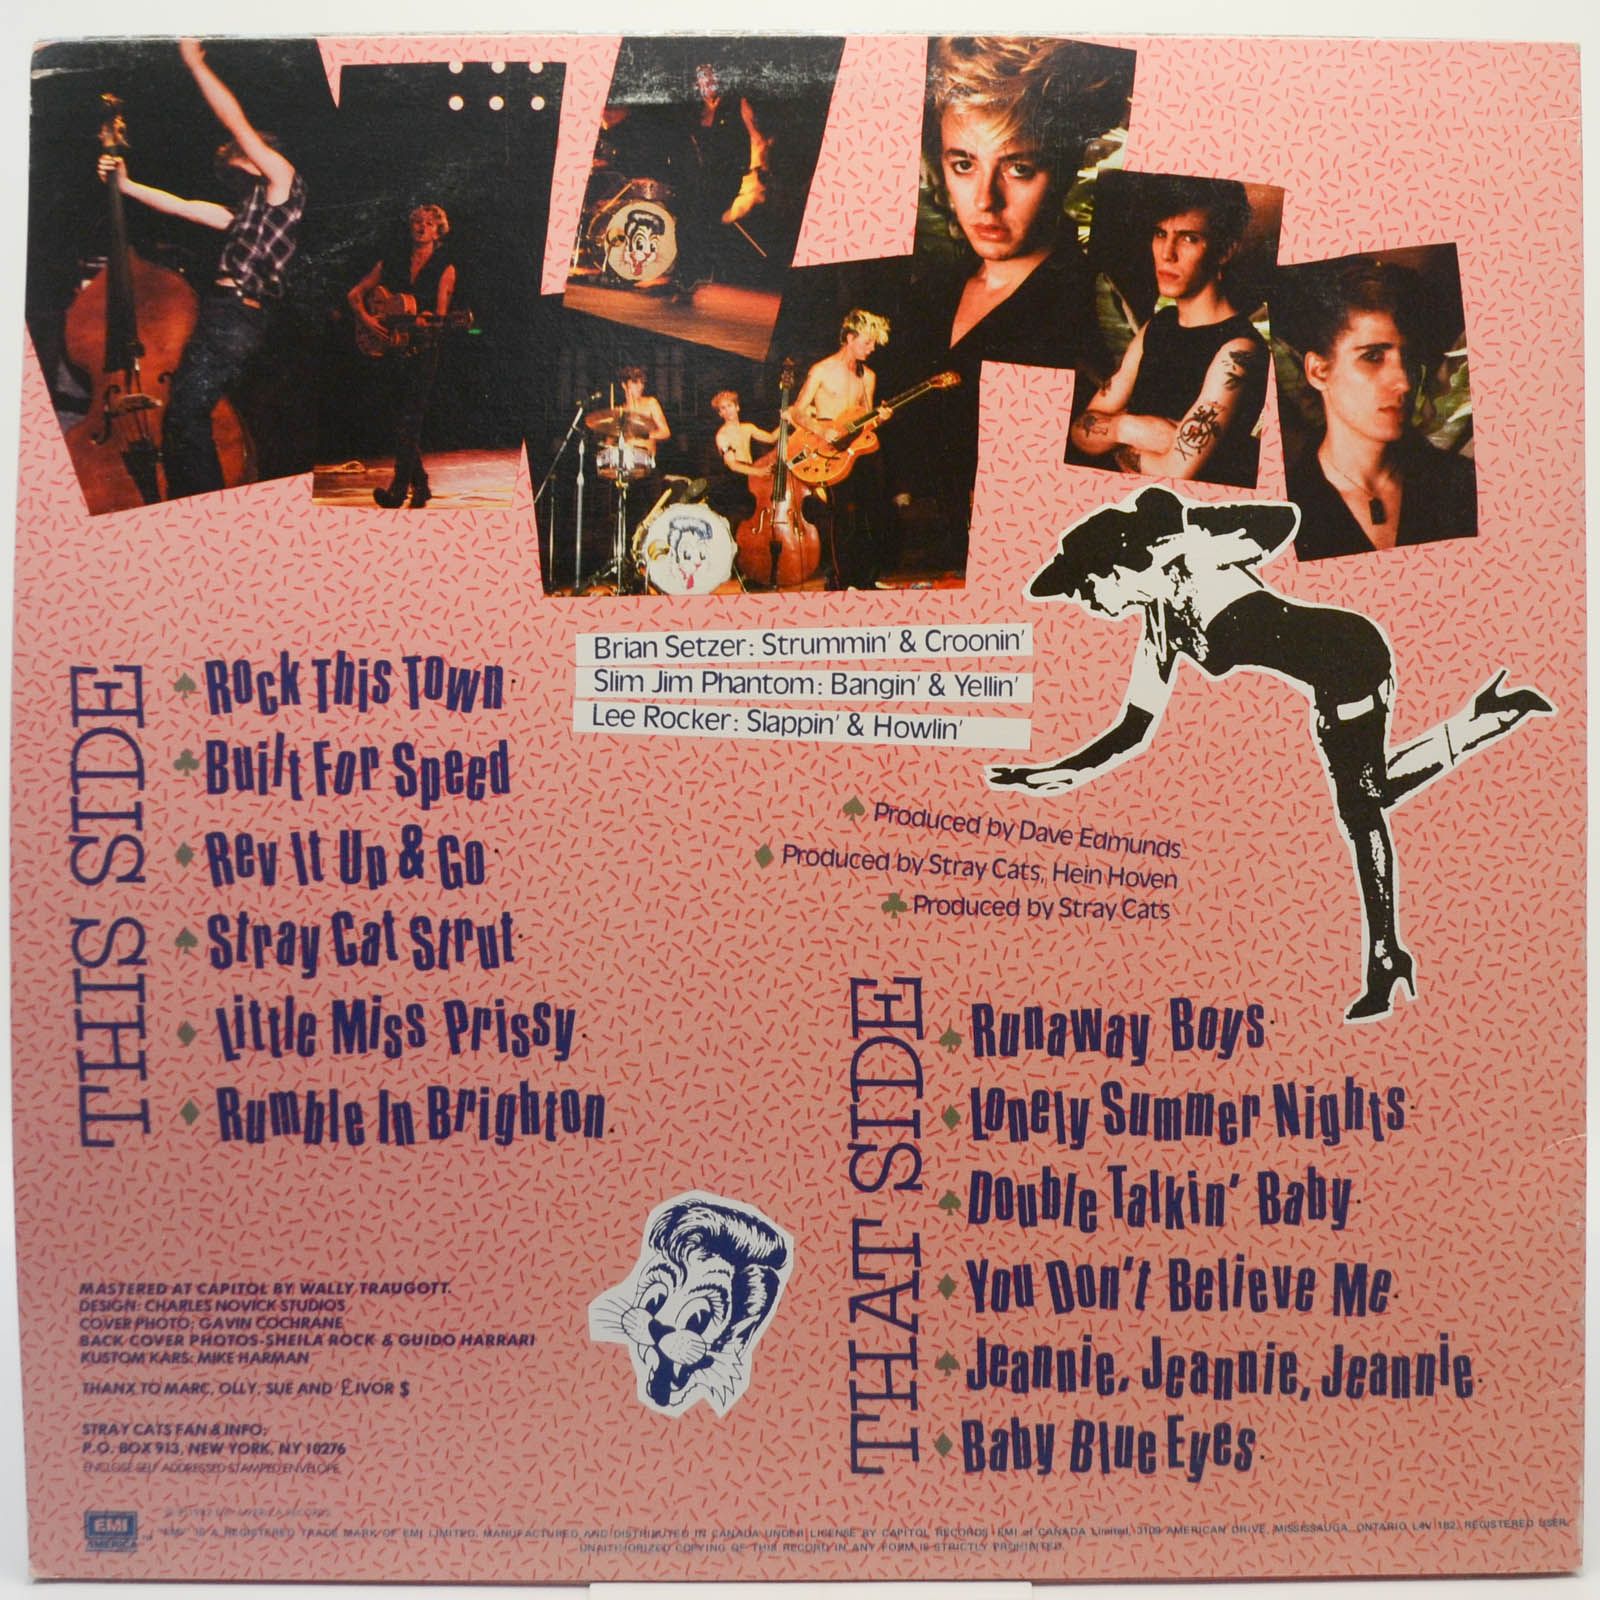 Stray Cats — Built For Speed, 1982